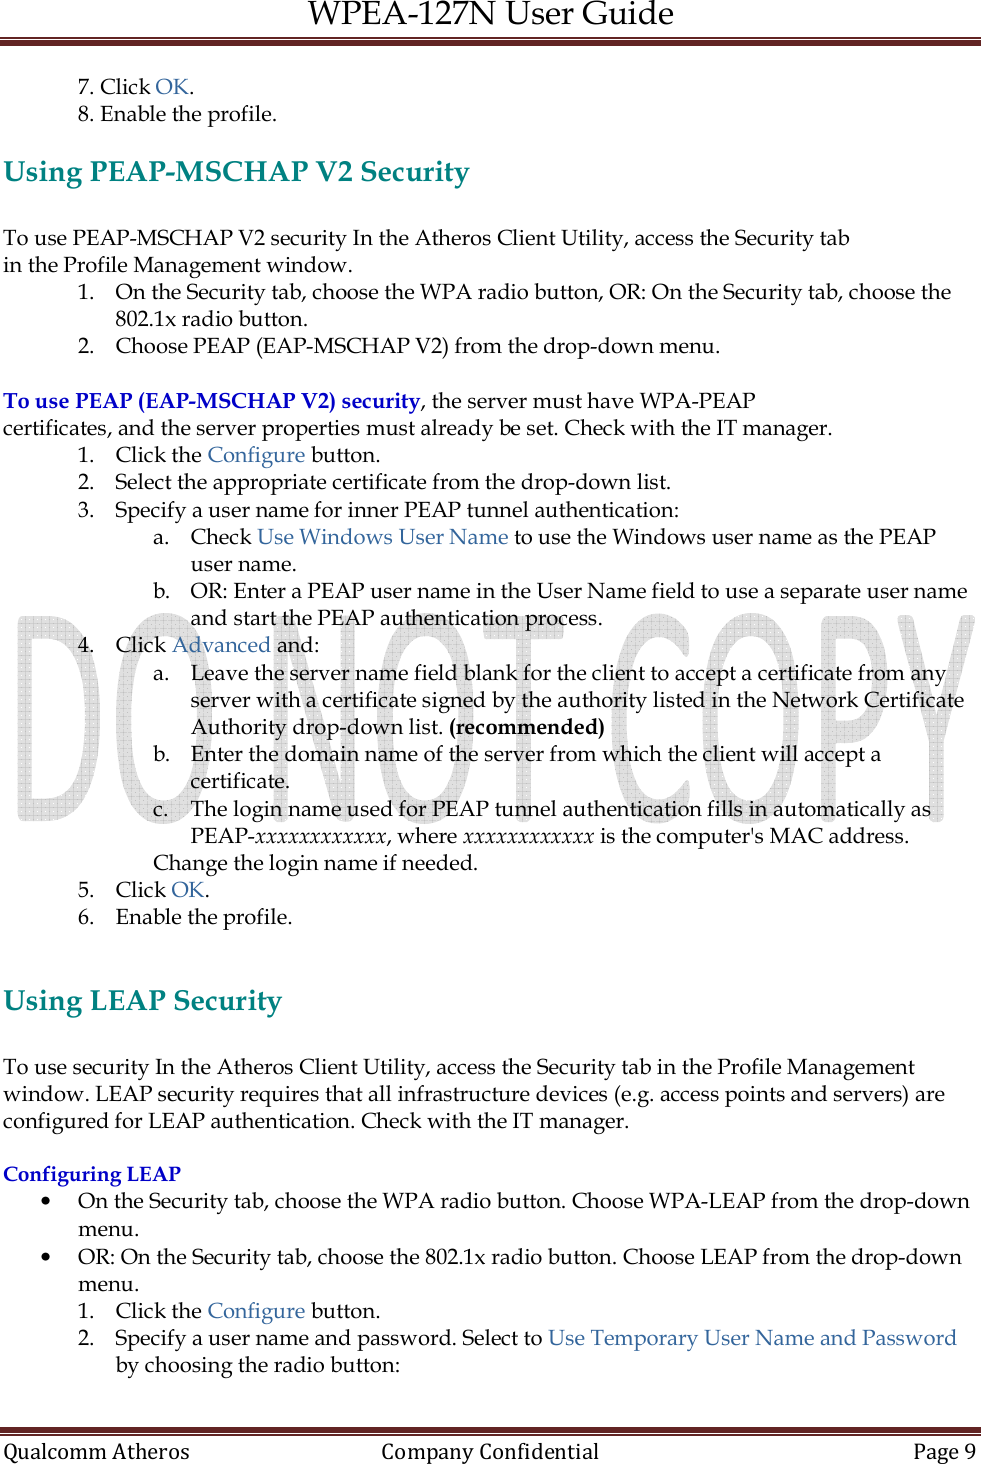 WPEA-127N User Guide  Qualcomm Atheros   Company Confidential  Page 9  7. Click OK. 8. Enable the profile.  Using PEAP-MSCHAP V2 Security  To use PEAP-MSCHAP V2 security In the Atheros Client Utility, access the Security tab in the Profile Management window. 1. On the Security tab, choose the WPA radio button, OR: On the Security tab, choose the 802.1x radio button. 2. Choose PEAP (EAP-MSCHAP V2) from the drop-down menu.  To use PEAP (EAP-MSCHAP V2) security, the server must have WPA-PEAP certificates, and the server properties must already be set. Check with the IT manager. 1. Click the Configure button. 2. Select the appropriate certificate from the drop-down list. 3. Specify a user name for inner PEAP tunnel authentication: a. Check Use Windows User Name to use the Windows user name as the PEAP user name. b. OR: Enter a PEAP user name in the User Name field to use a separate user name and start the PEAP authentication process. 4. Click Advanced and: a. Leave the server name field blank for the client to accept a certificate from any server with a certificate signed by the authority listed in the Network Certificate Authority drop-down list. (recommended) b. Enter the domain name of the server from which the client will accept a certificate. c. The login name used for PEAP tunnel authentication fills in automatically as PEAP-xxxxxxxxxxxx, where xxxxxxxxxxxx is the computer&apos;s MAC address.  Change the login name if needed. 5. Click OK. 6. Enable the profile.   Using LEAP Security  To use security In the Atheros Client Utility, access the Security tab in the Profile Management window. LEAP security requires that all infrastructure devices (e.g. access points and servers) are configured for LEAP authentication. Check with the IT manager.  Configuring LEAP • On the Security tab, choose the WPA radio button. Choose WPA-LEAP from the drop-down menu. • OR: On the Security tab, choose the 802.1x radio button. Choose LEAP from the drop-down menu. 1. Click the Configure button. 2. Specify a user name and password. Select to Use Temporary User Name and Password by choosing the radio button: 